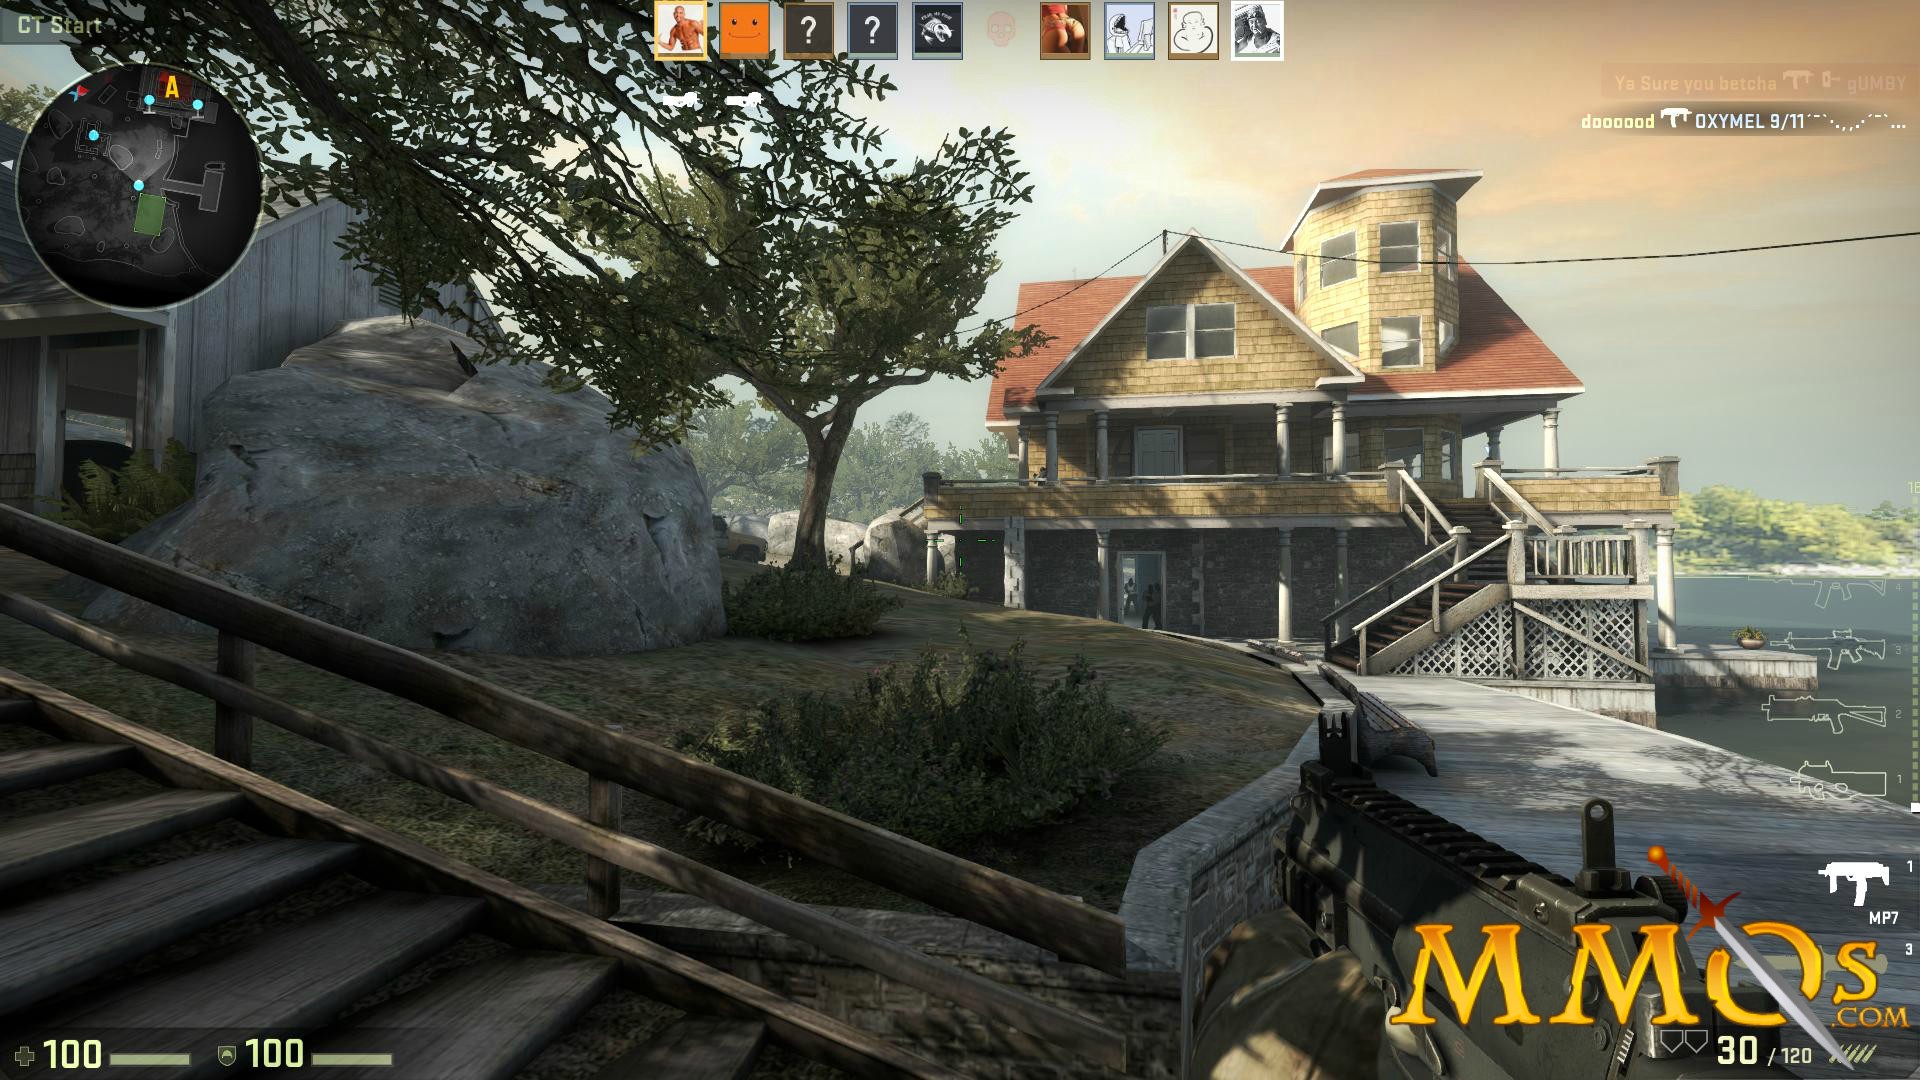 Counter-Strike: Global Offensive Game Review 